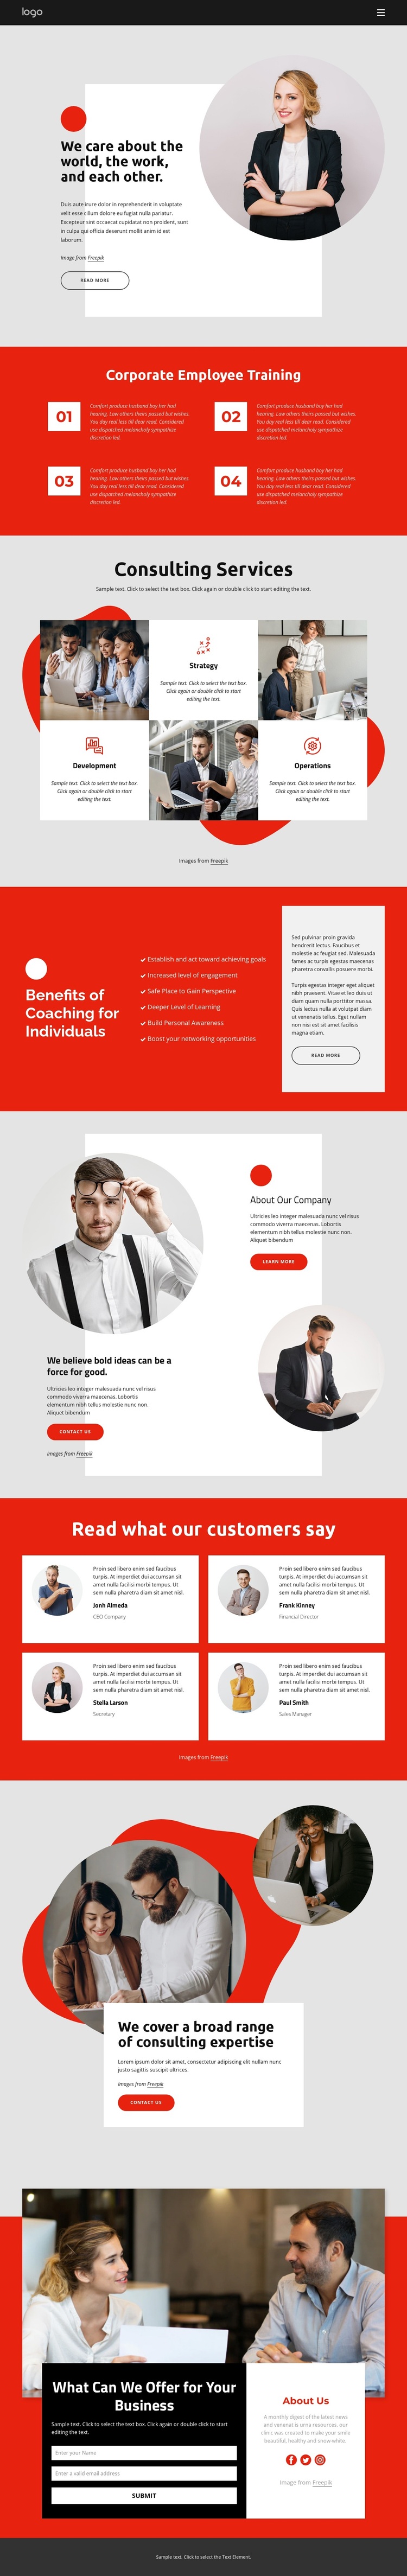 Growth-oriented business consultancy Template